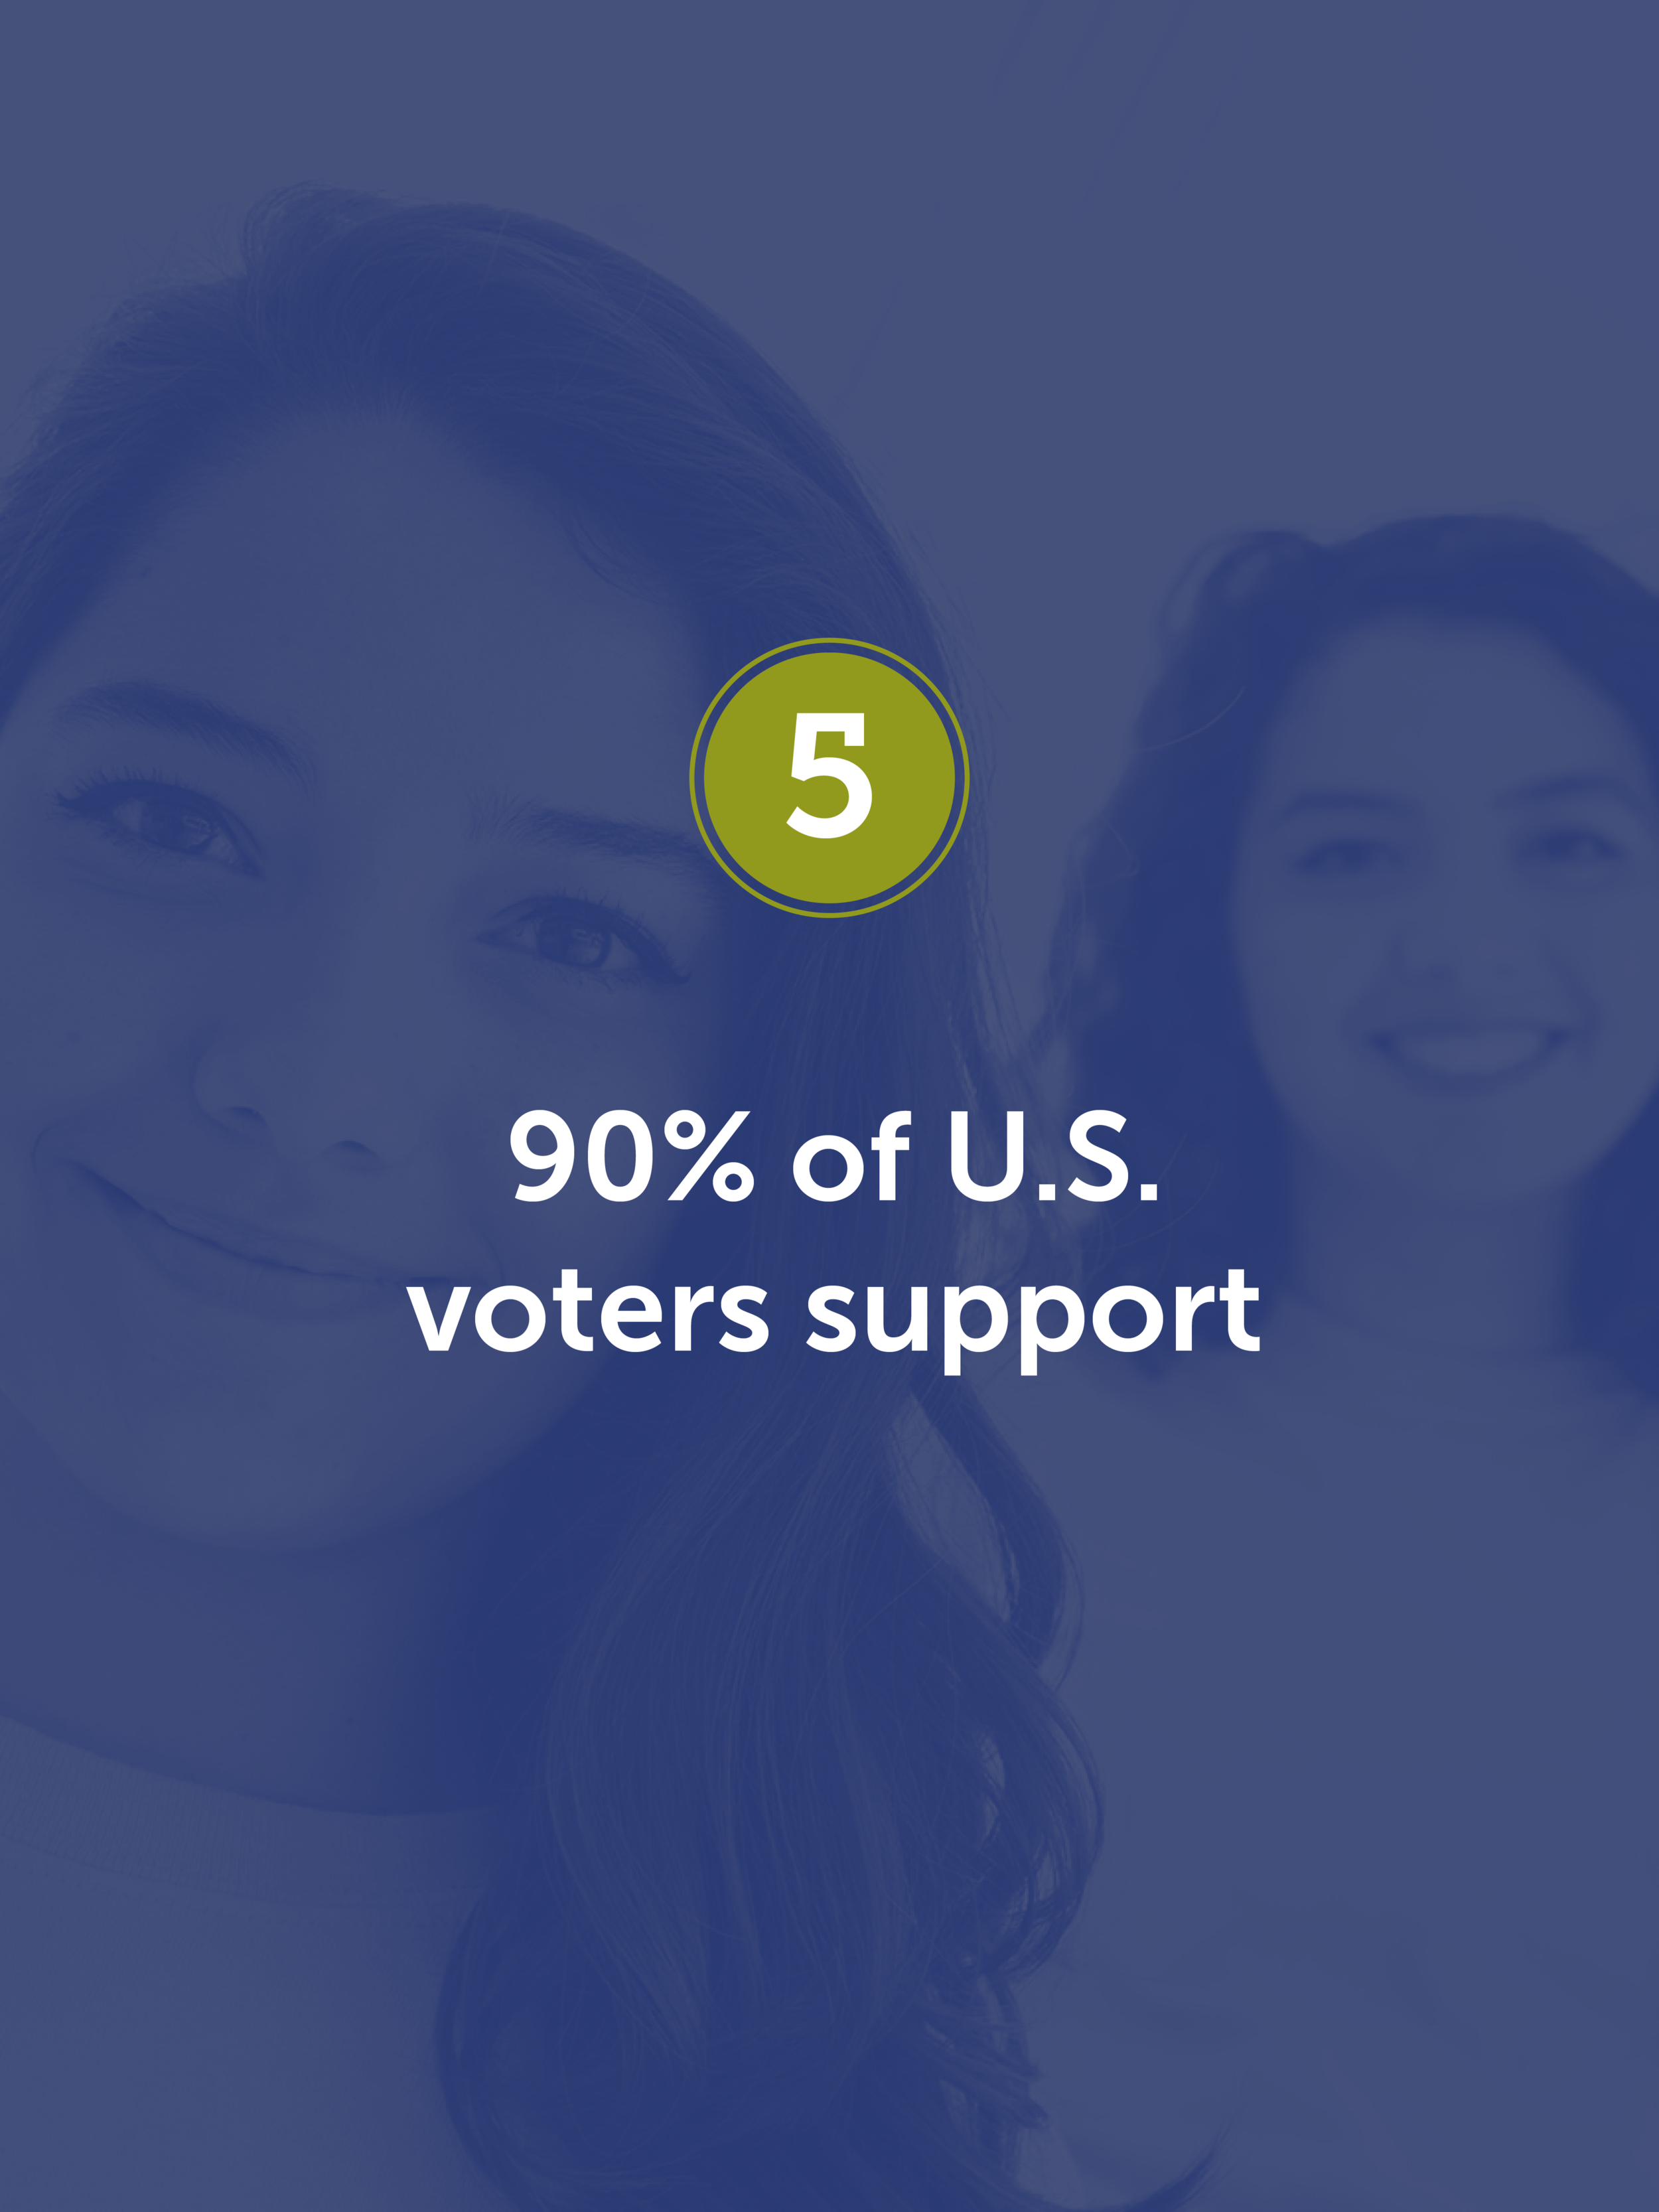 90% of voters in a 2016 poll agreed that our nation needs an education system that produces educators, business leaders, and diplomats who understand other cultures and language.